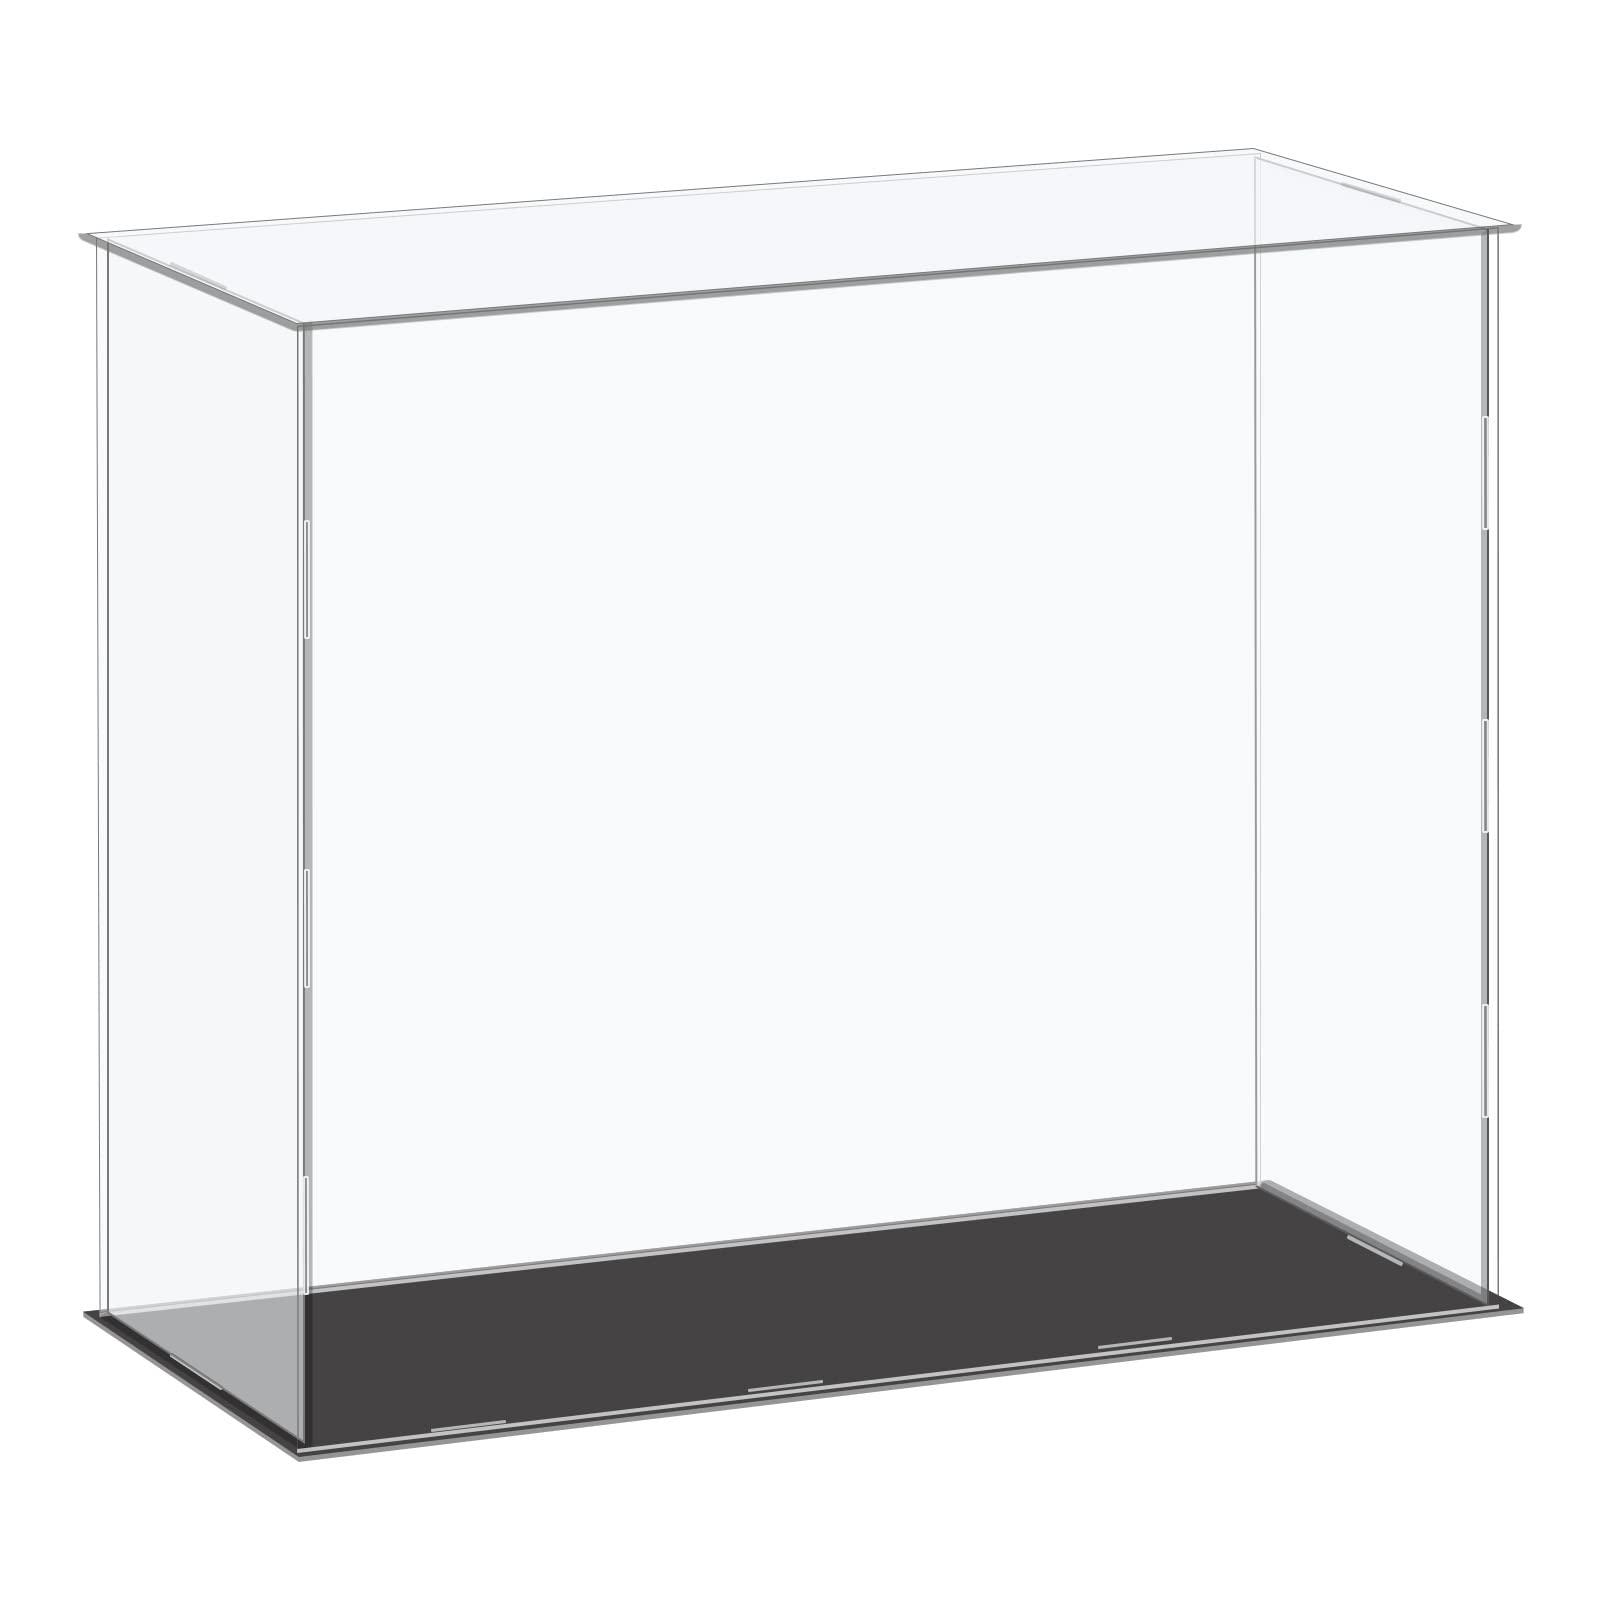 sourcing map Acrylic Display Case Plastic Box Cube Storage Box Clear Small Assemble Dustproof Showcase 41x16x35.5cm for Collectibles Items